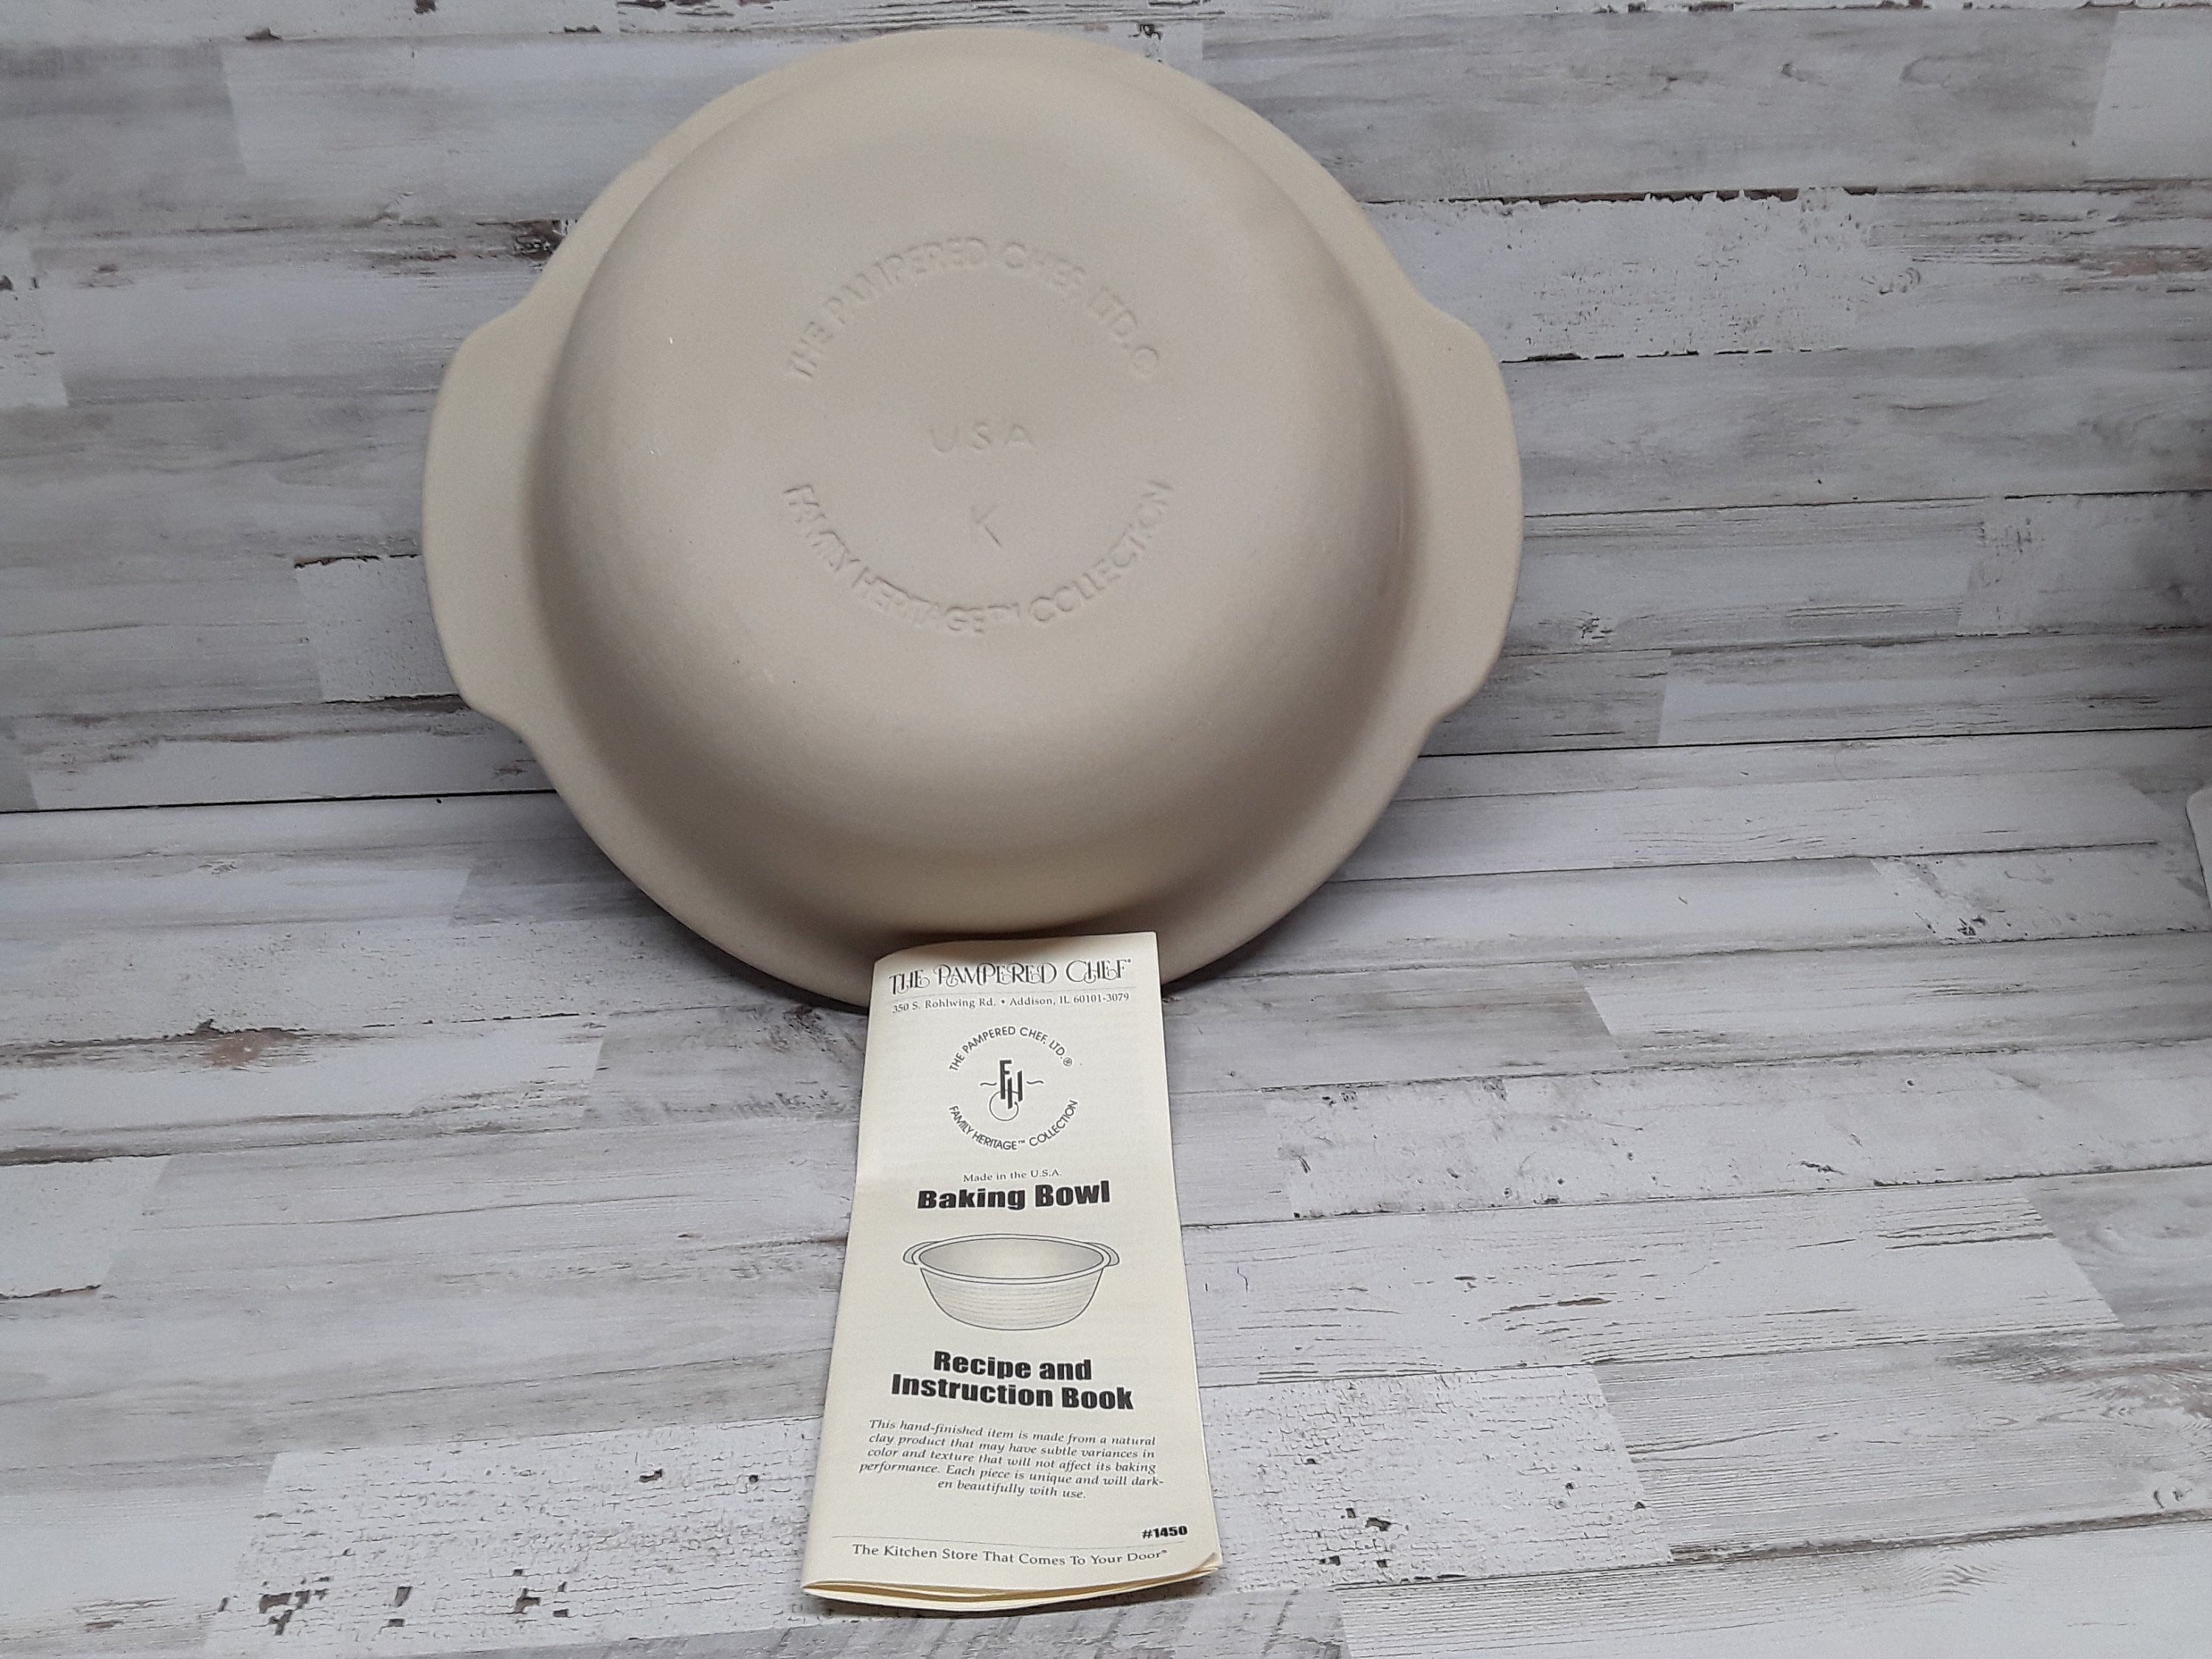 Never Used Pampered Chef 1468 Family Heritage Stoneware 6